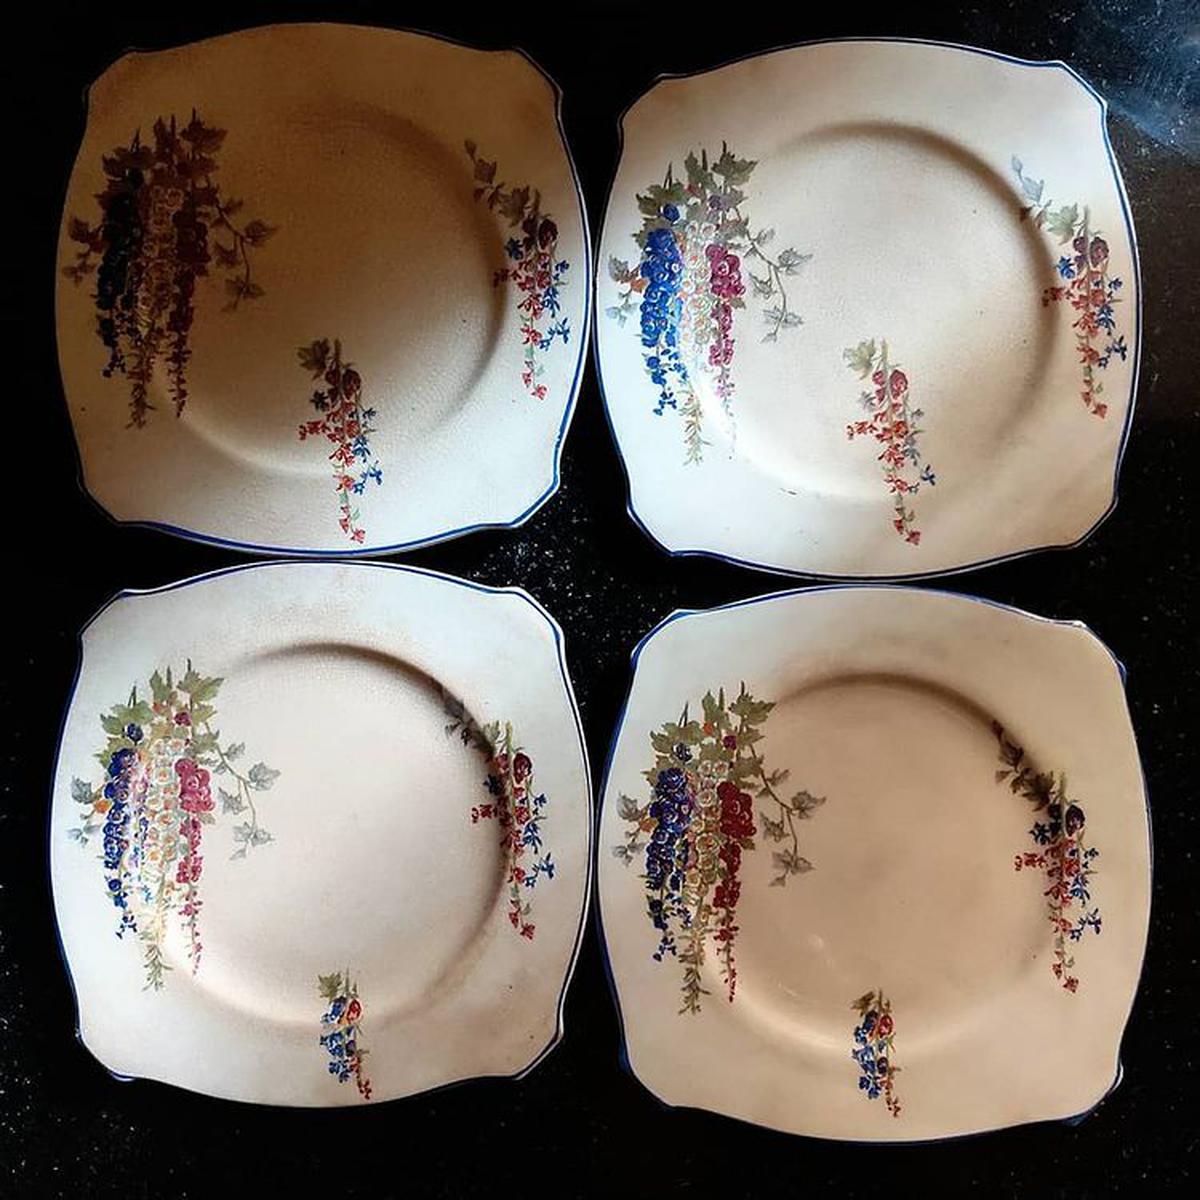 From Rhea Mitra Dalal’s vintage crockery collection